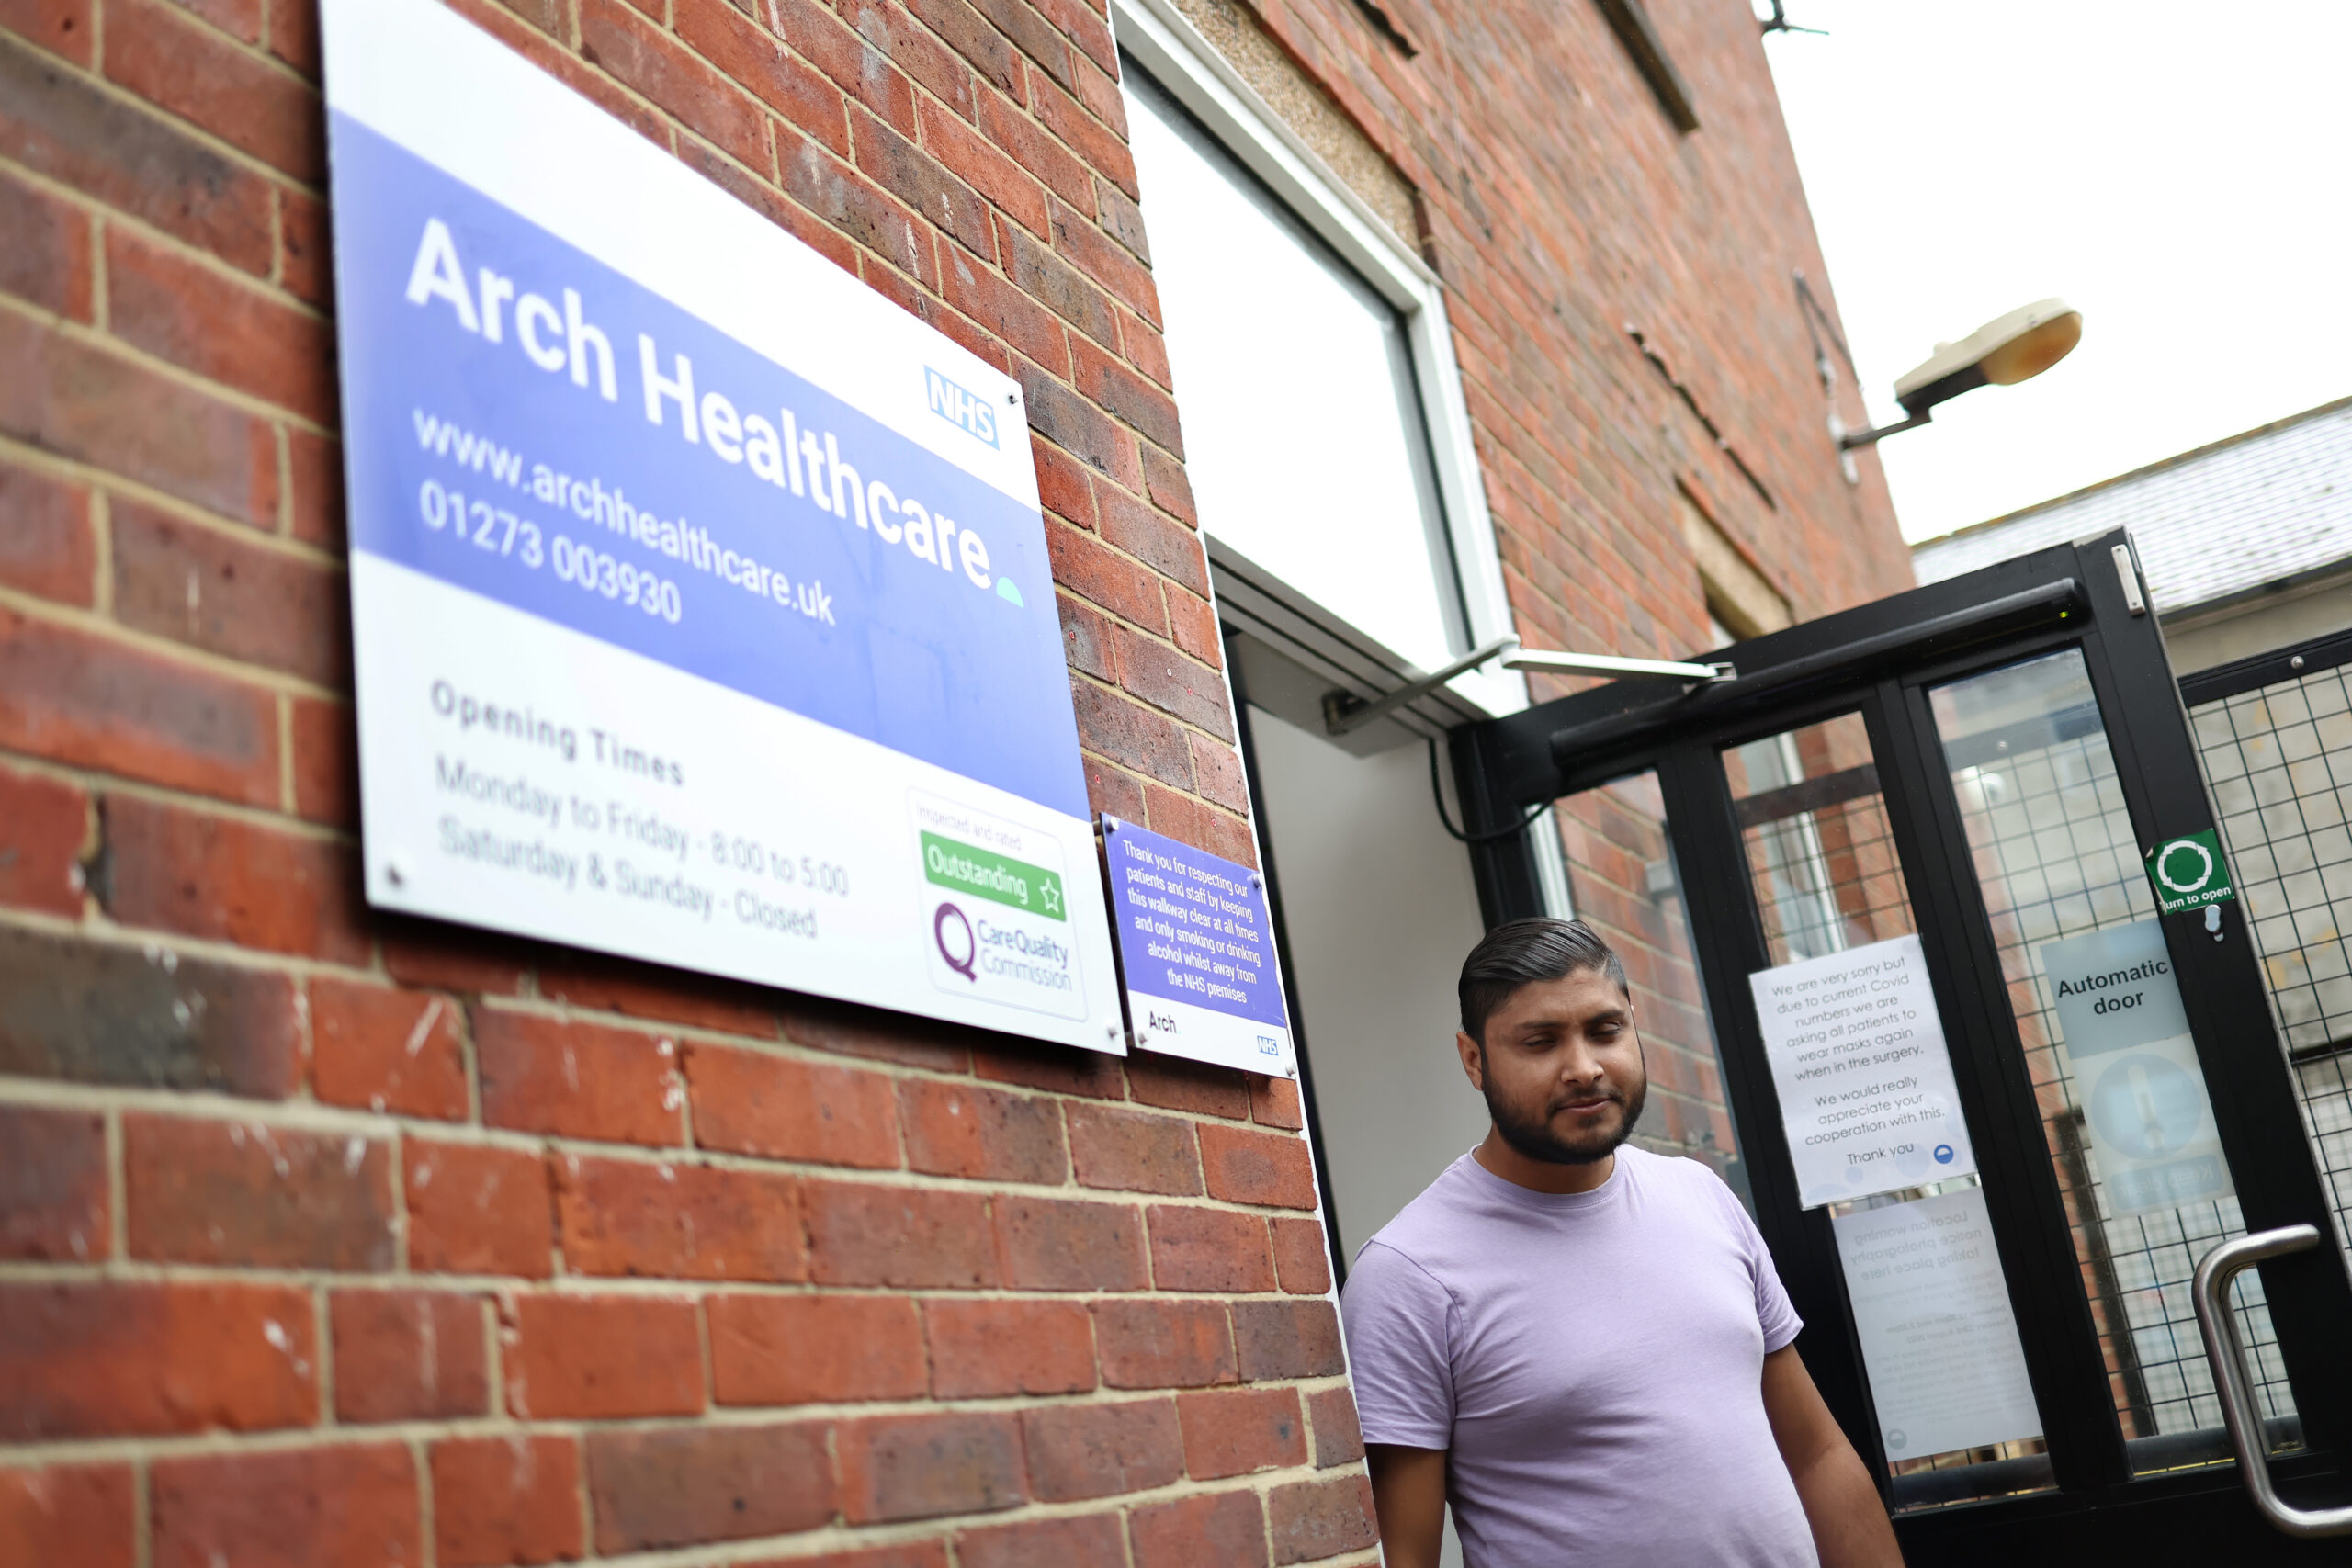 A patient walking out the front door of the Arch Healthcare surgery, with the front sign in clear visibility